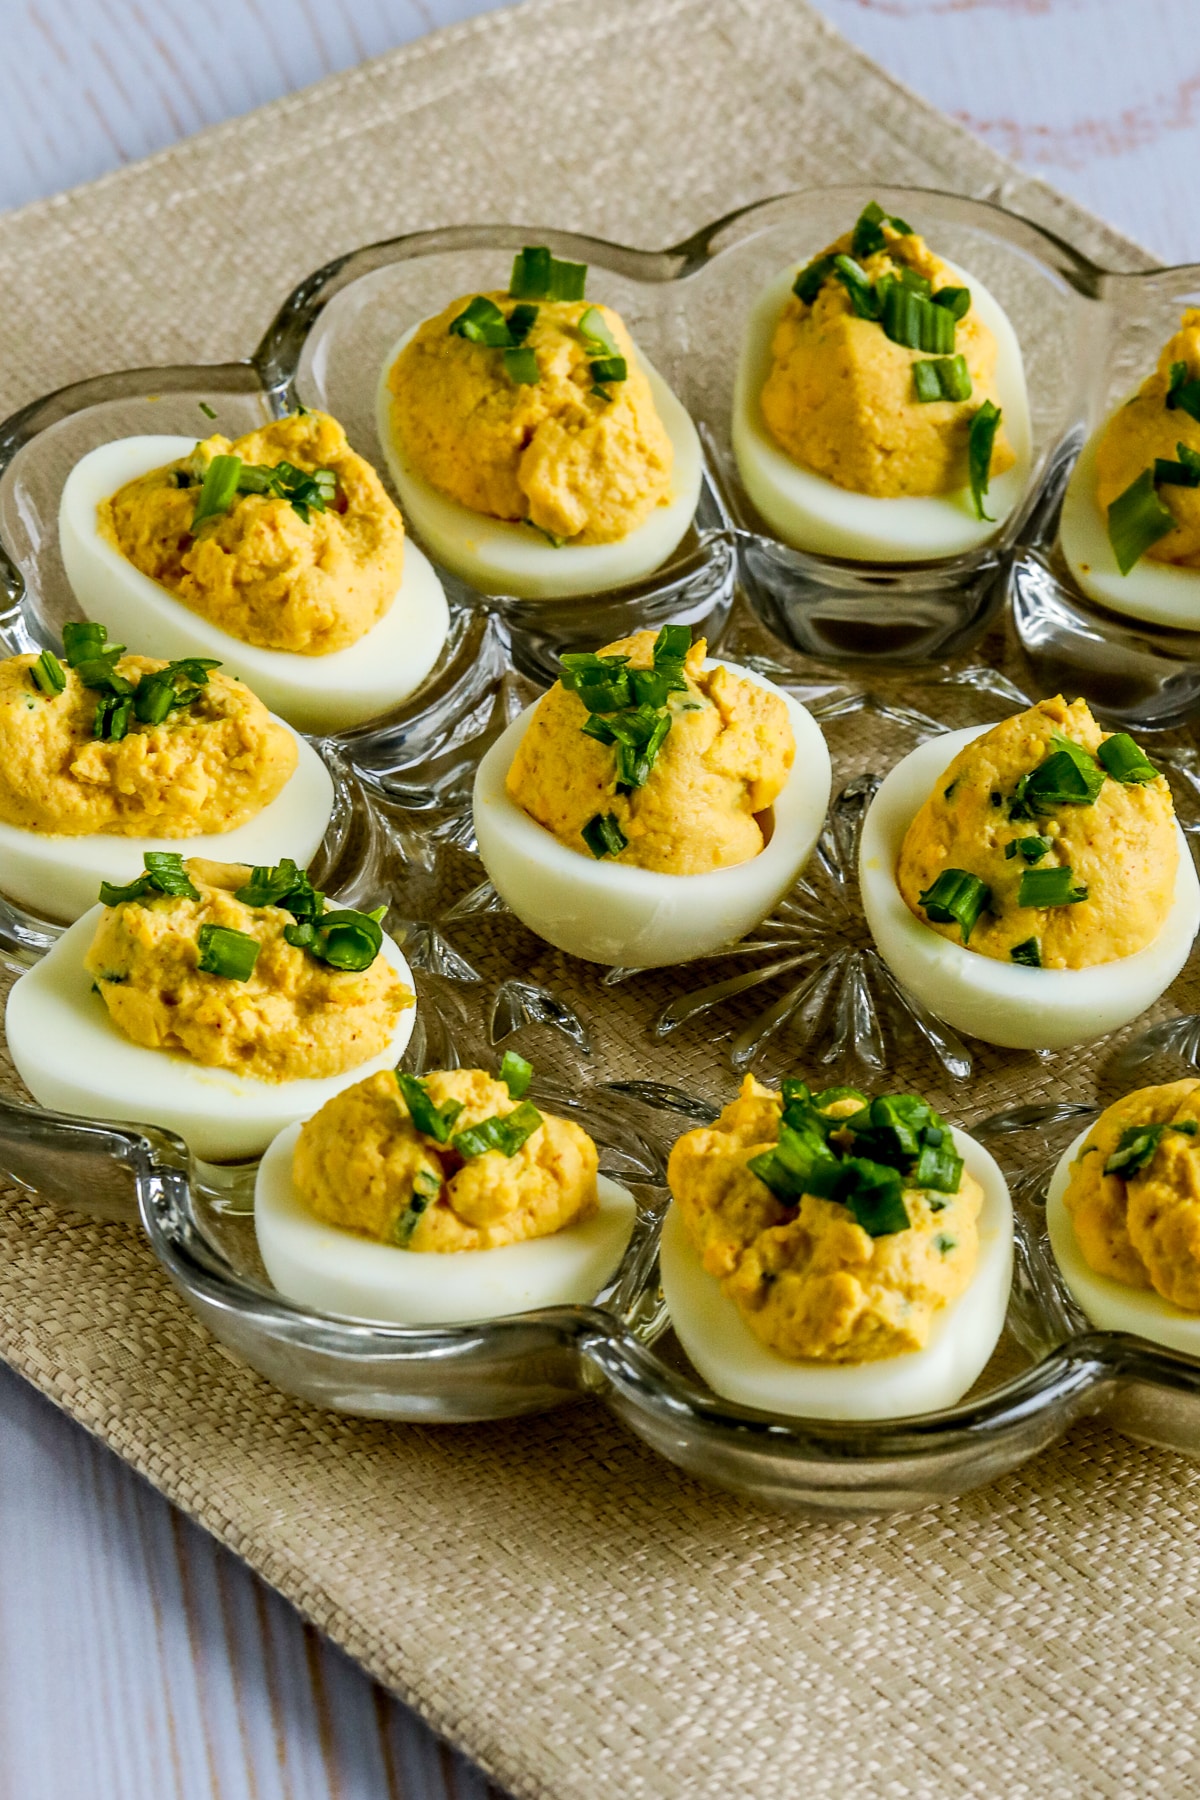 Spicy Deviled Eggs (with Chipotle and Lime) with eggs shown on egg plate.